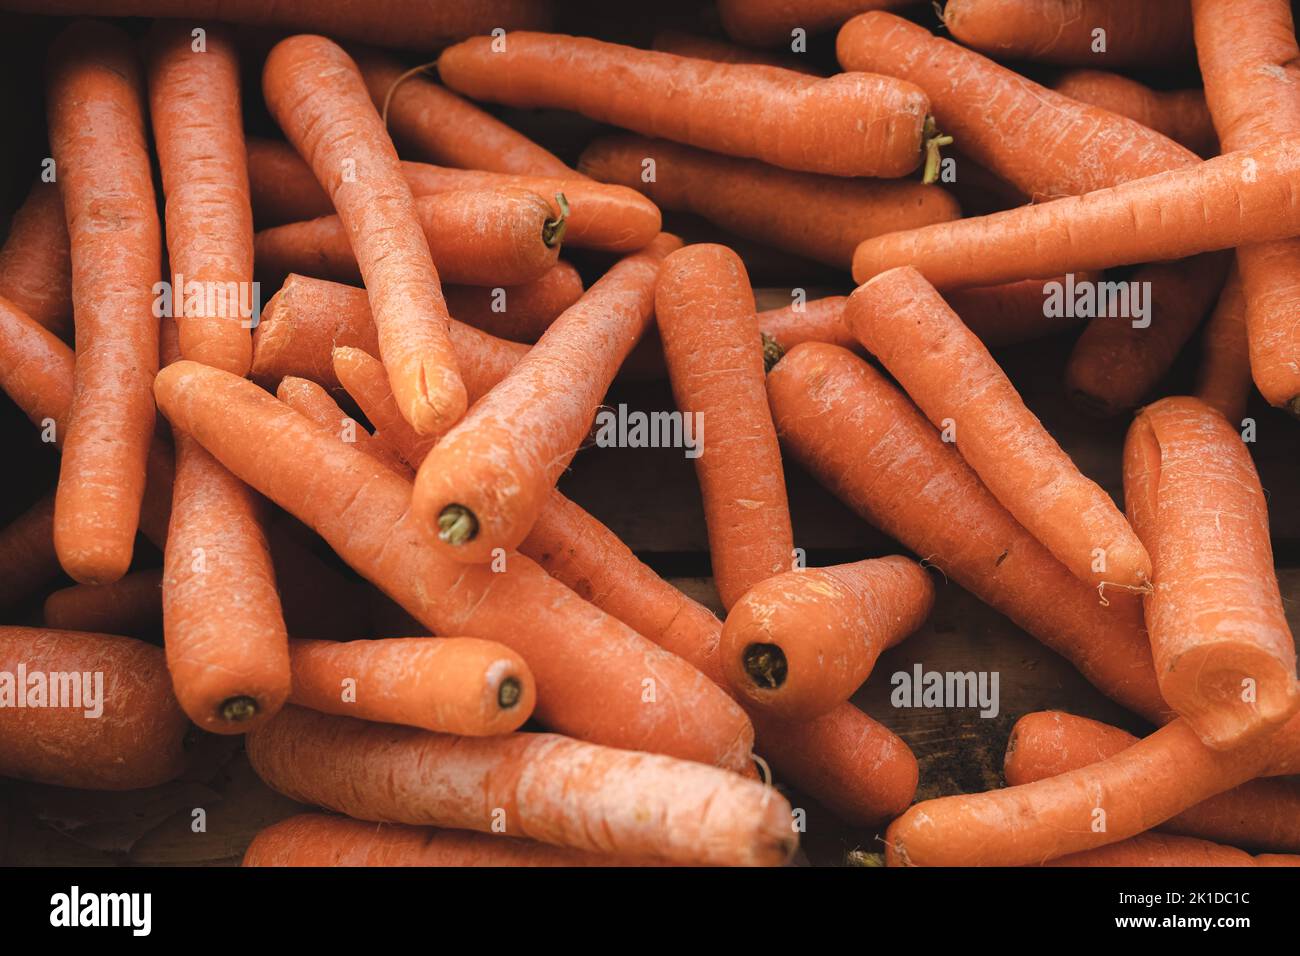 Fresh, organic, carrots on display at an outdoor rural country farmer's market in Scotland, UK. Stock Photo